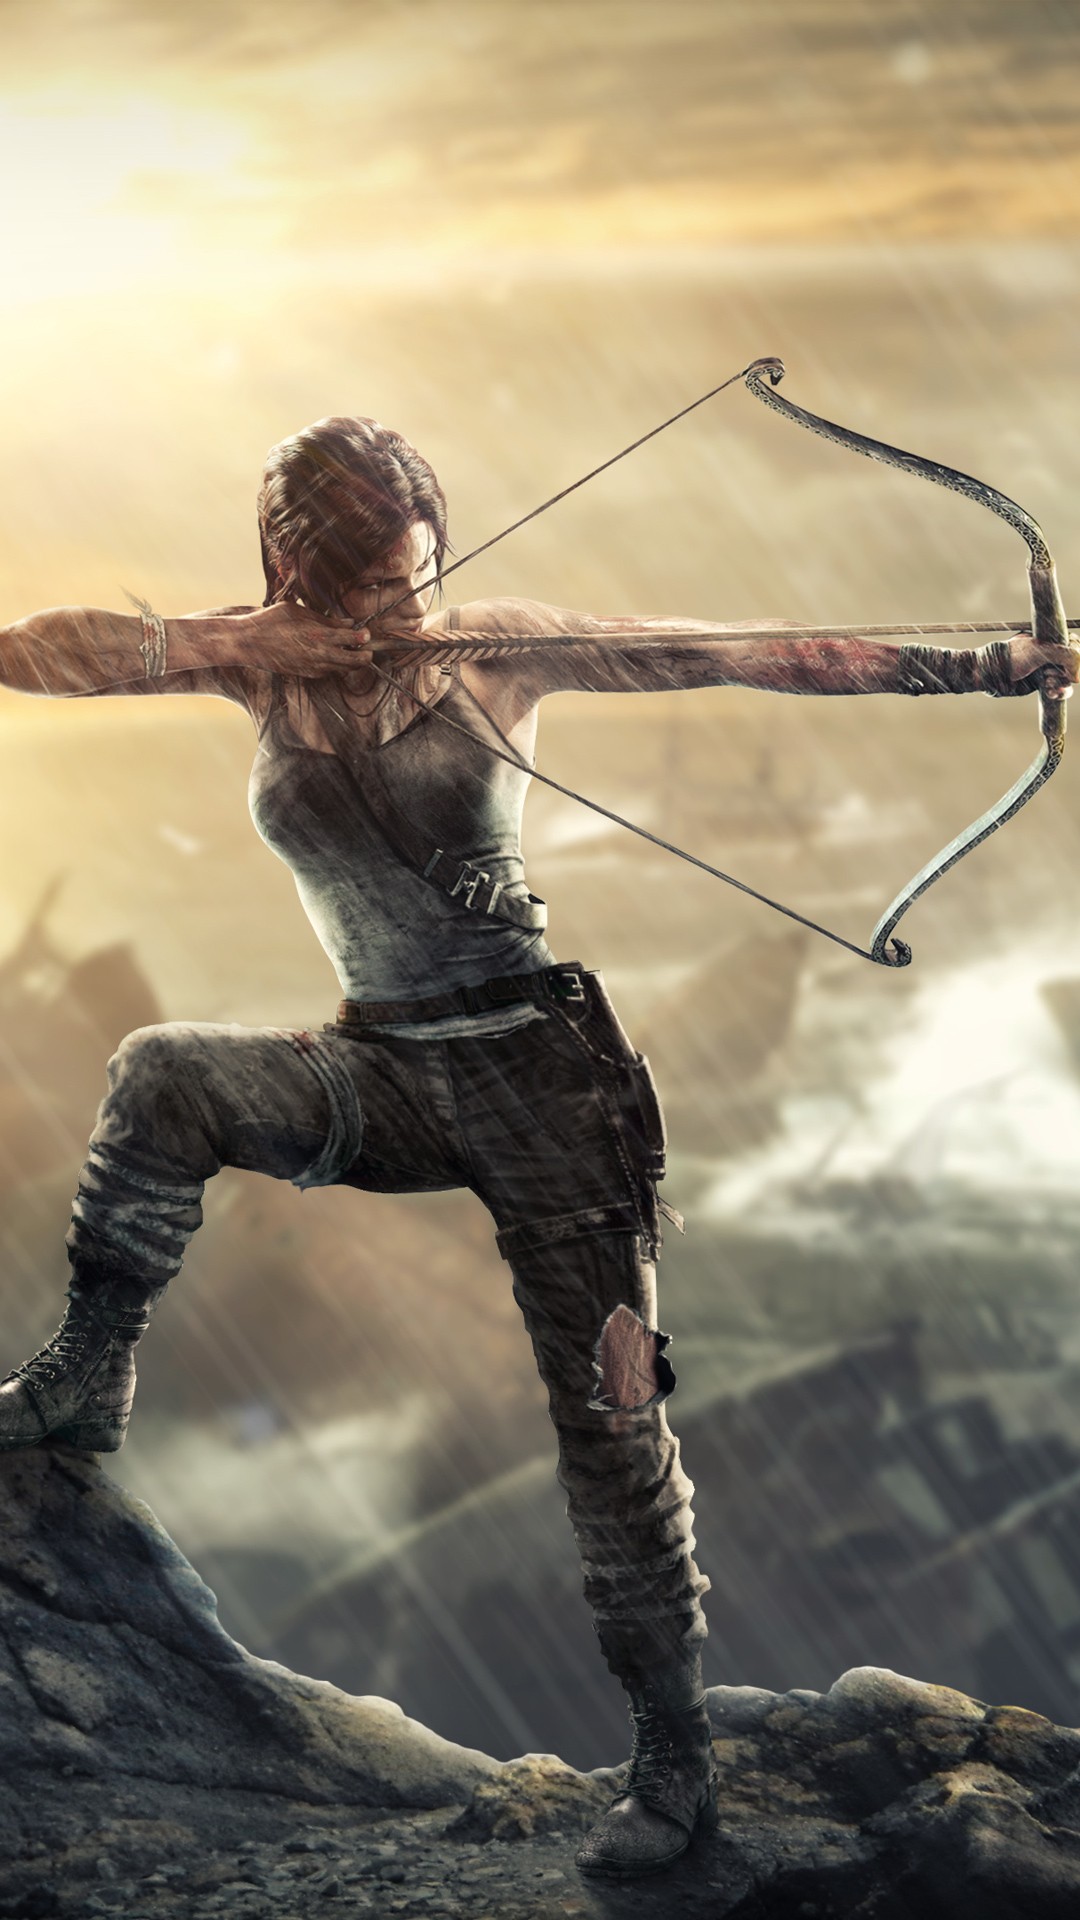 tomb raider wallpaper 4k,bow and arrow,compound bow,longbow,archery,bow